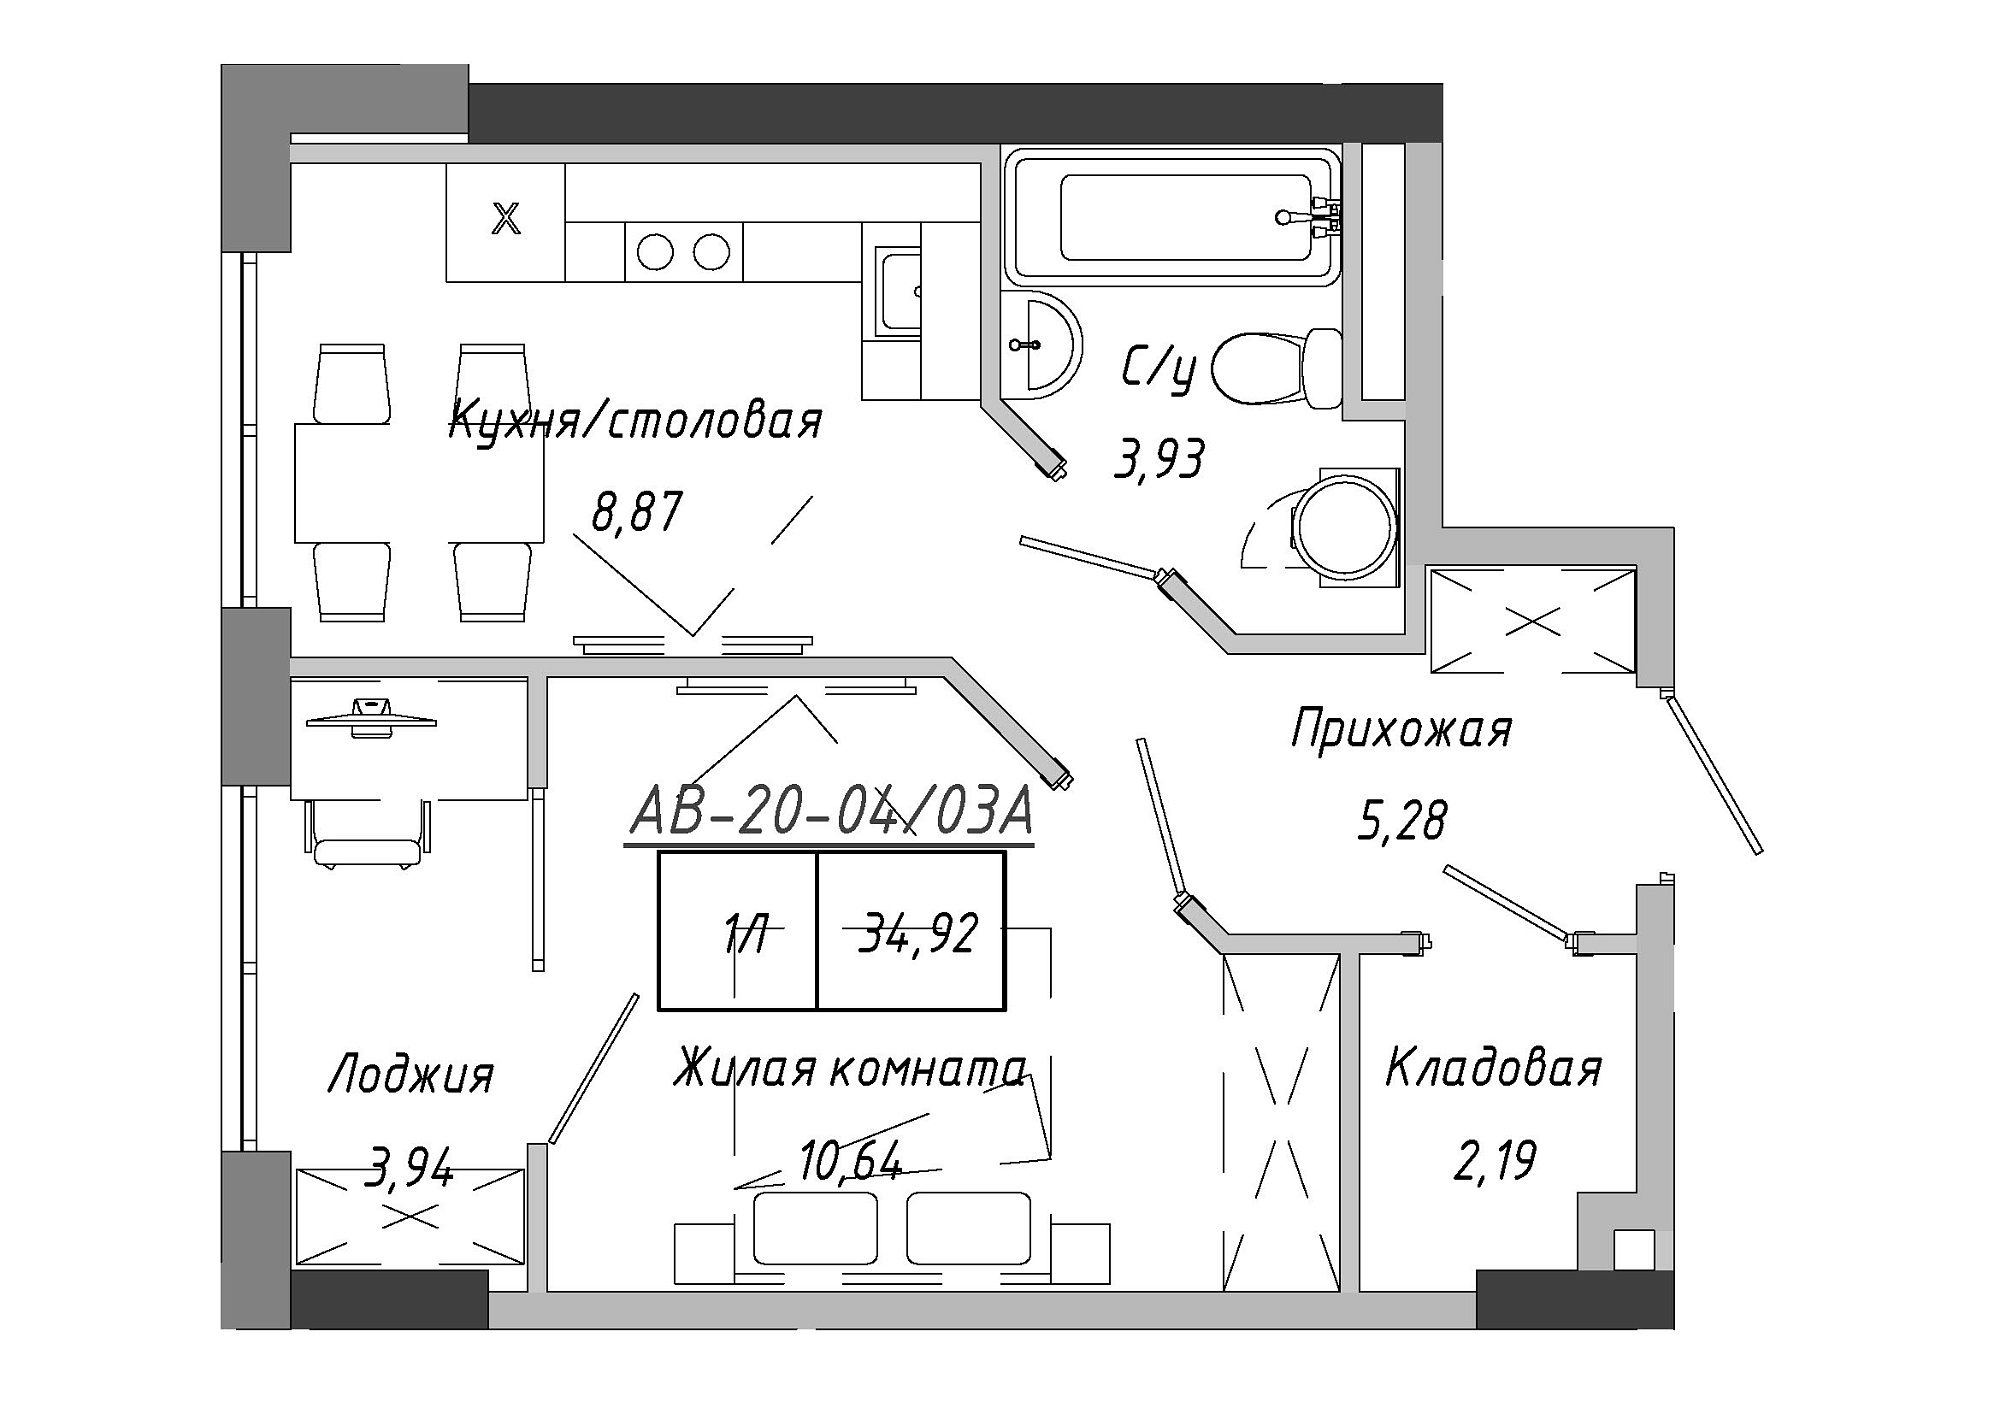 Planning 1-rm flats area 34.92m2, AB-20-04/0003а.